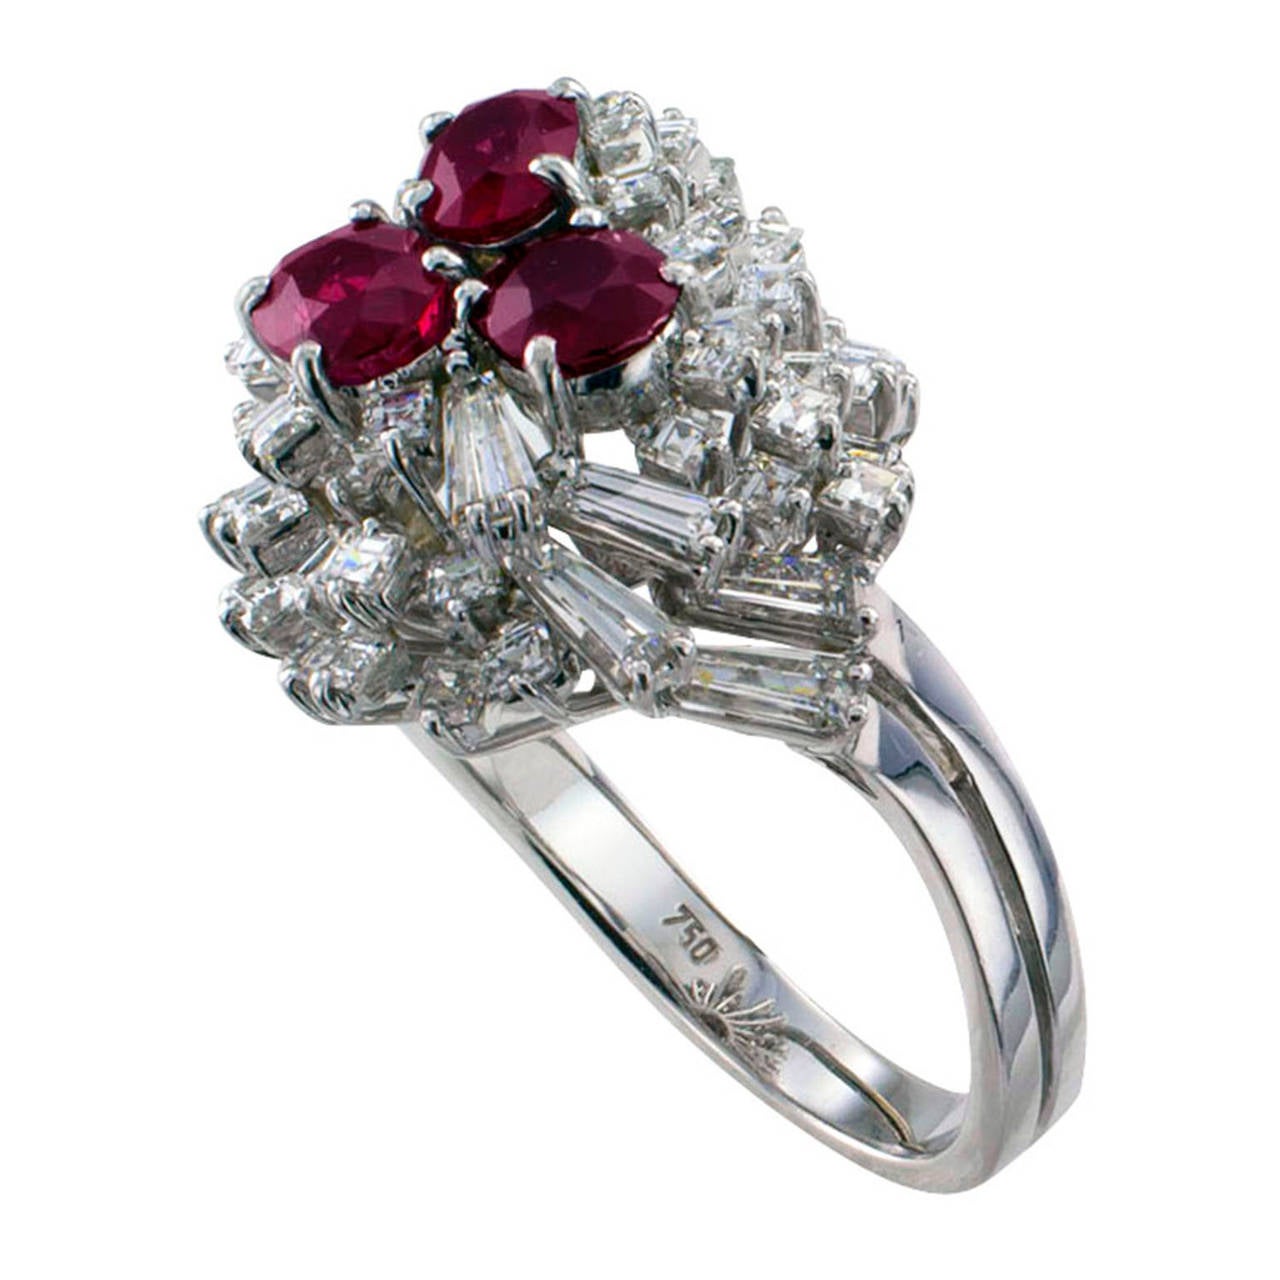 Ruby and Diamond Cocktail Ring
A most intriguing and unique design shaped as a spiraling swirl composed by fifty-nine square-cut and tapered baguette cut diamonds totaling approximately 2.50 carats (approximately VS clarity, G-H color), topped by a